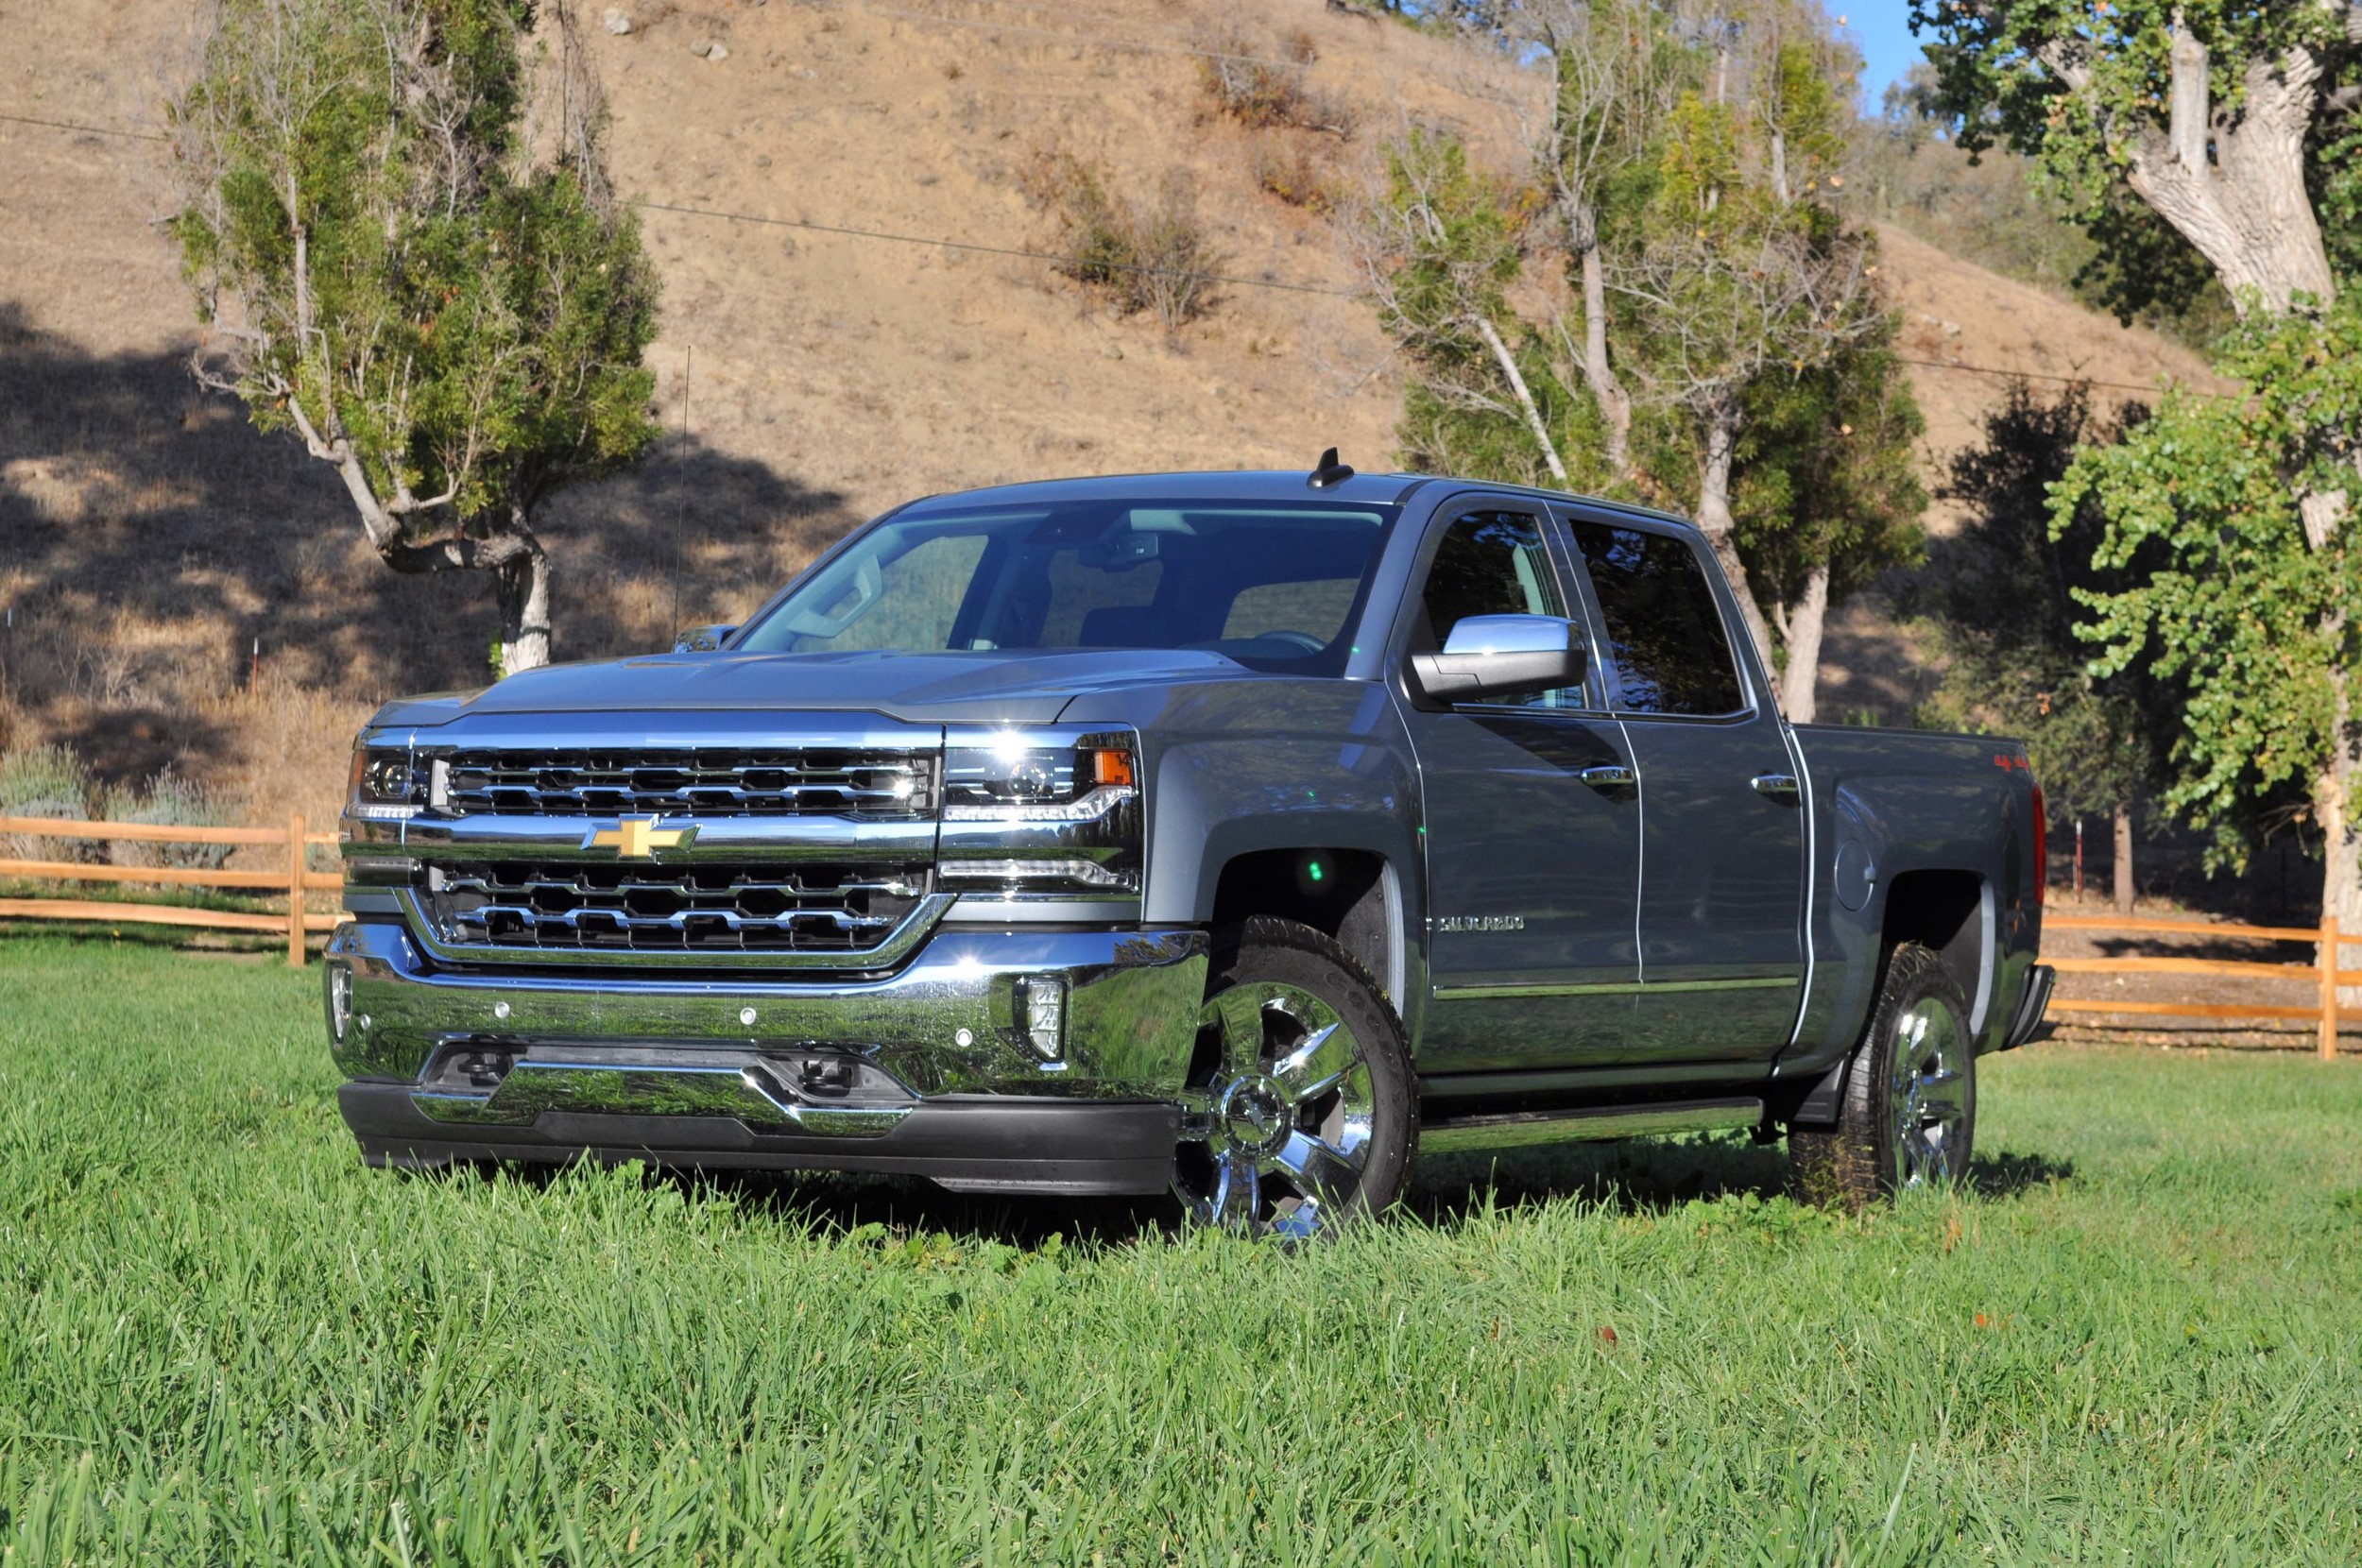 Amazing Chevrolet Silverado Pictures & Backgrounds